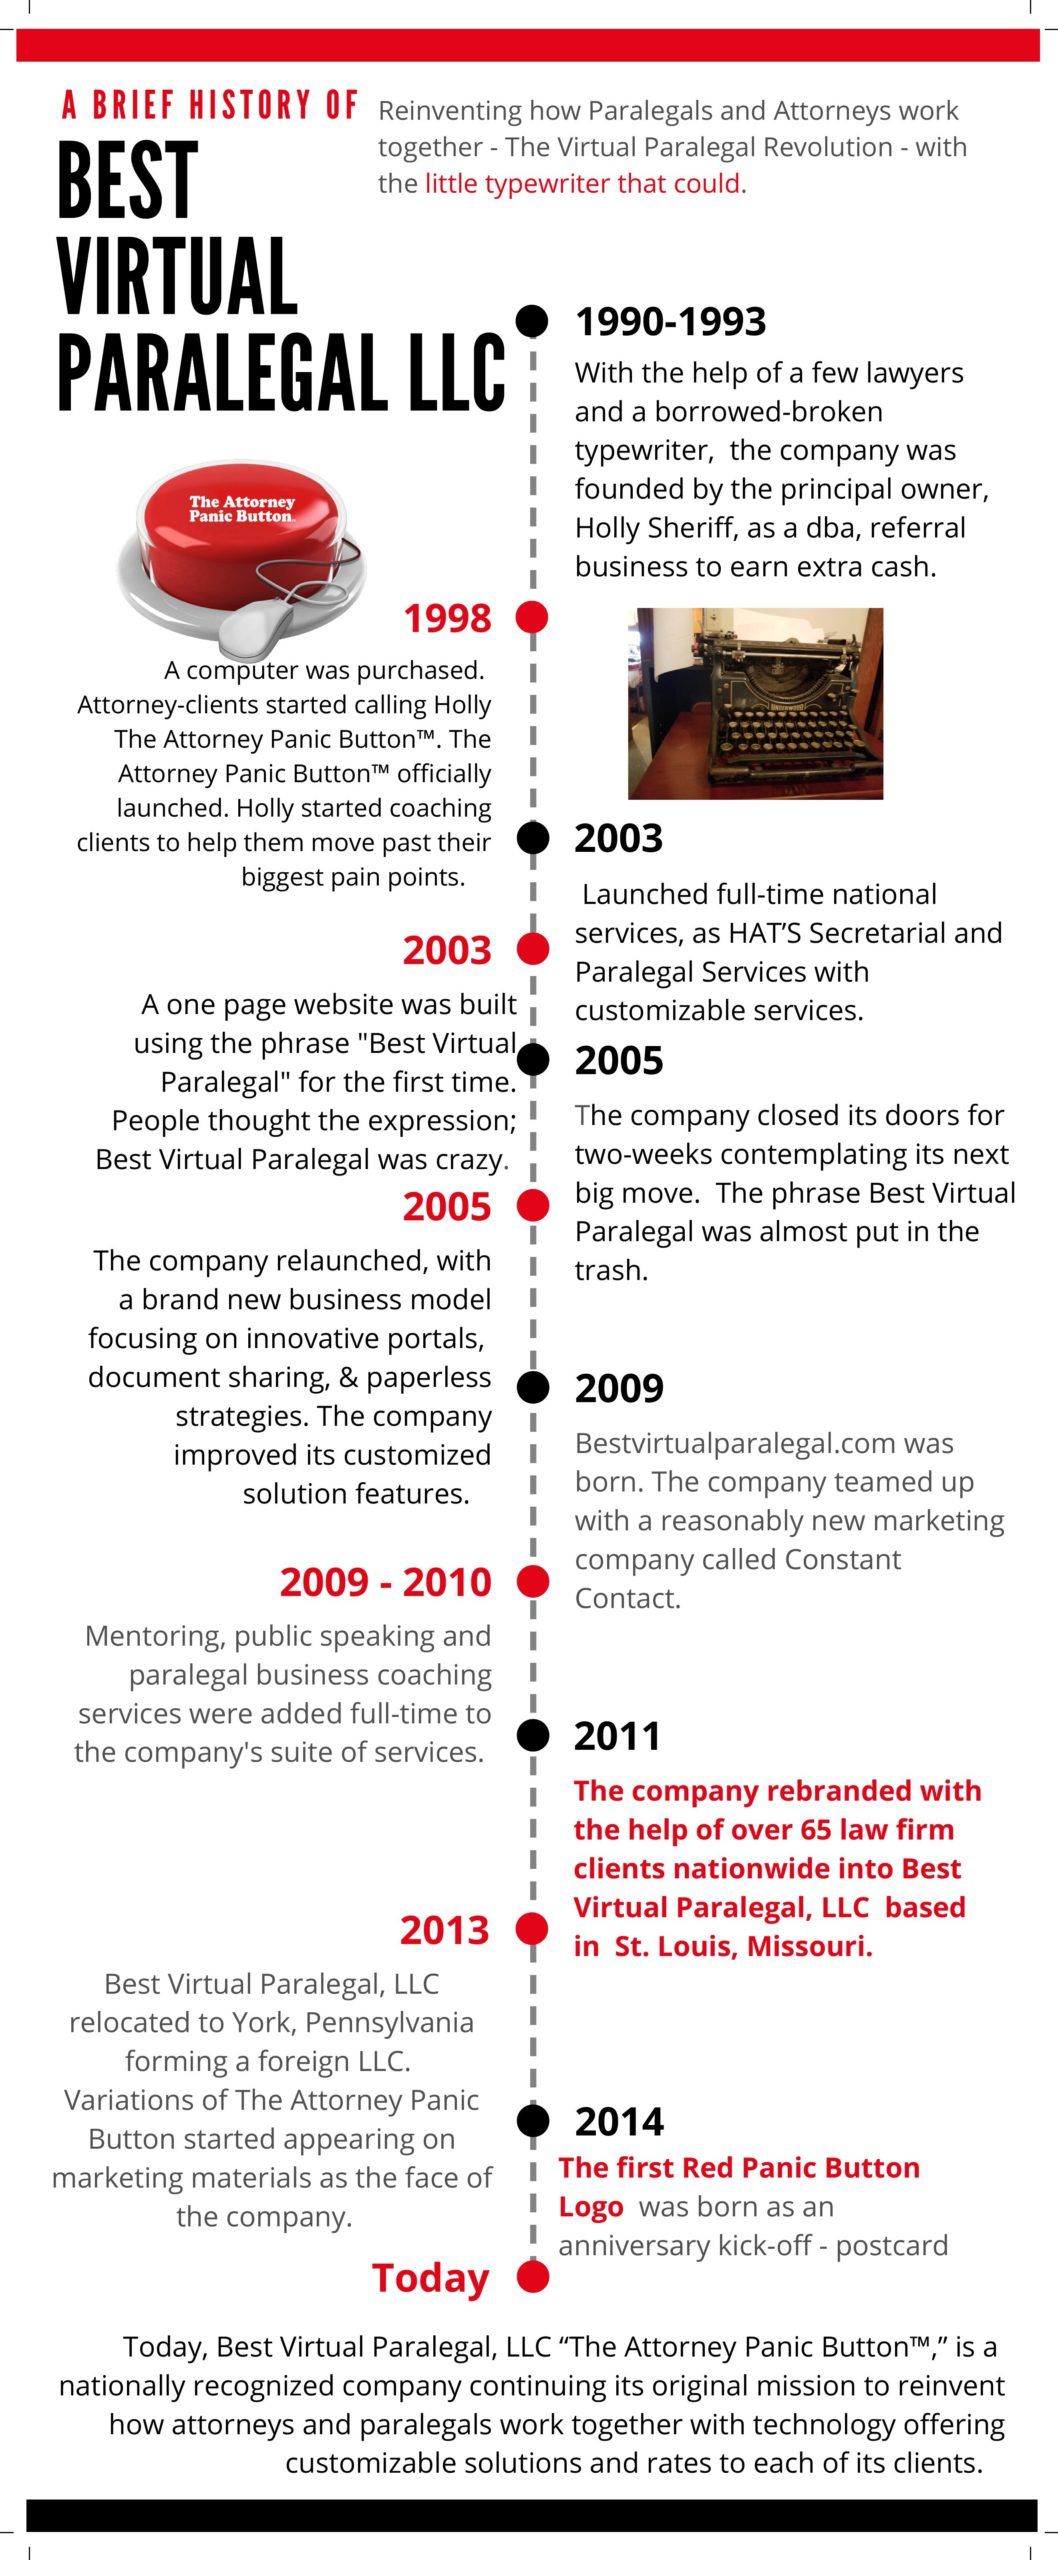 Best Virtual Paralegal History Timeline Infographic